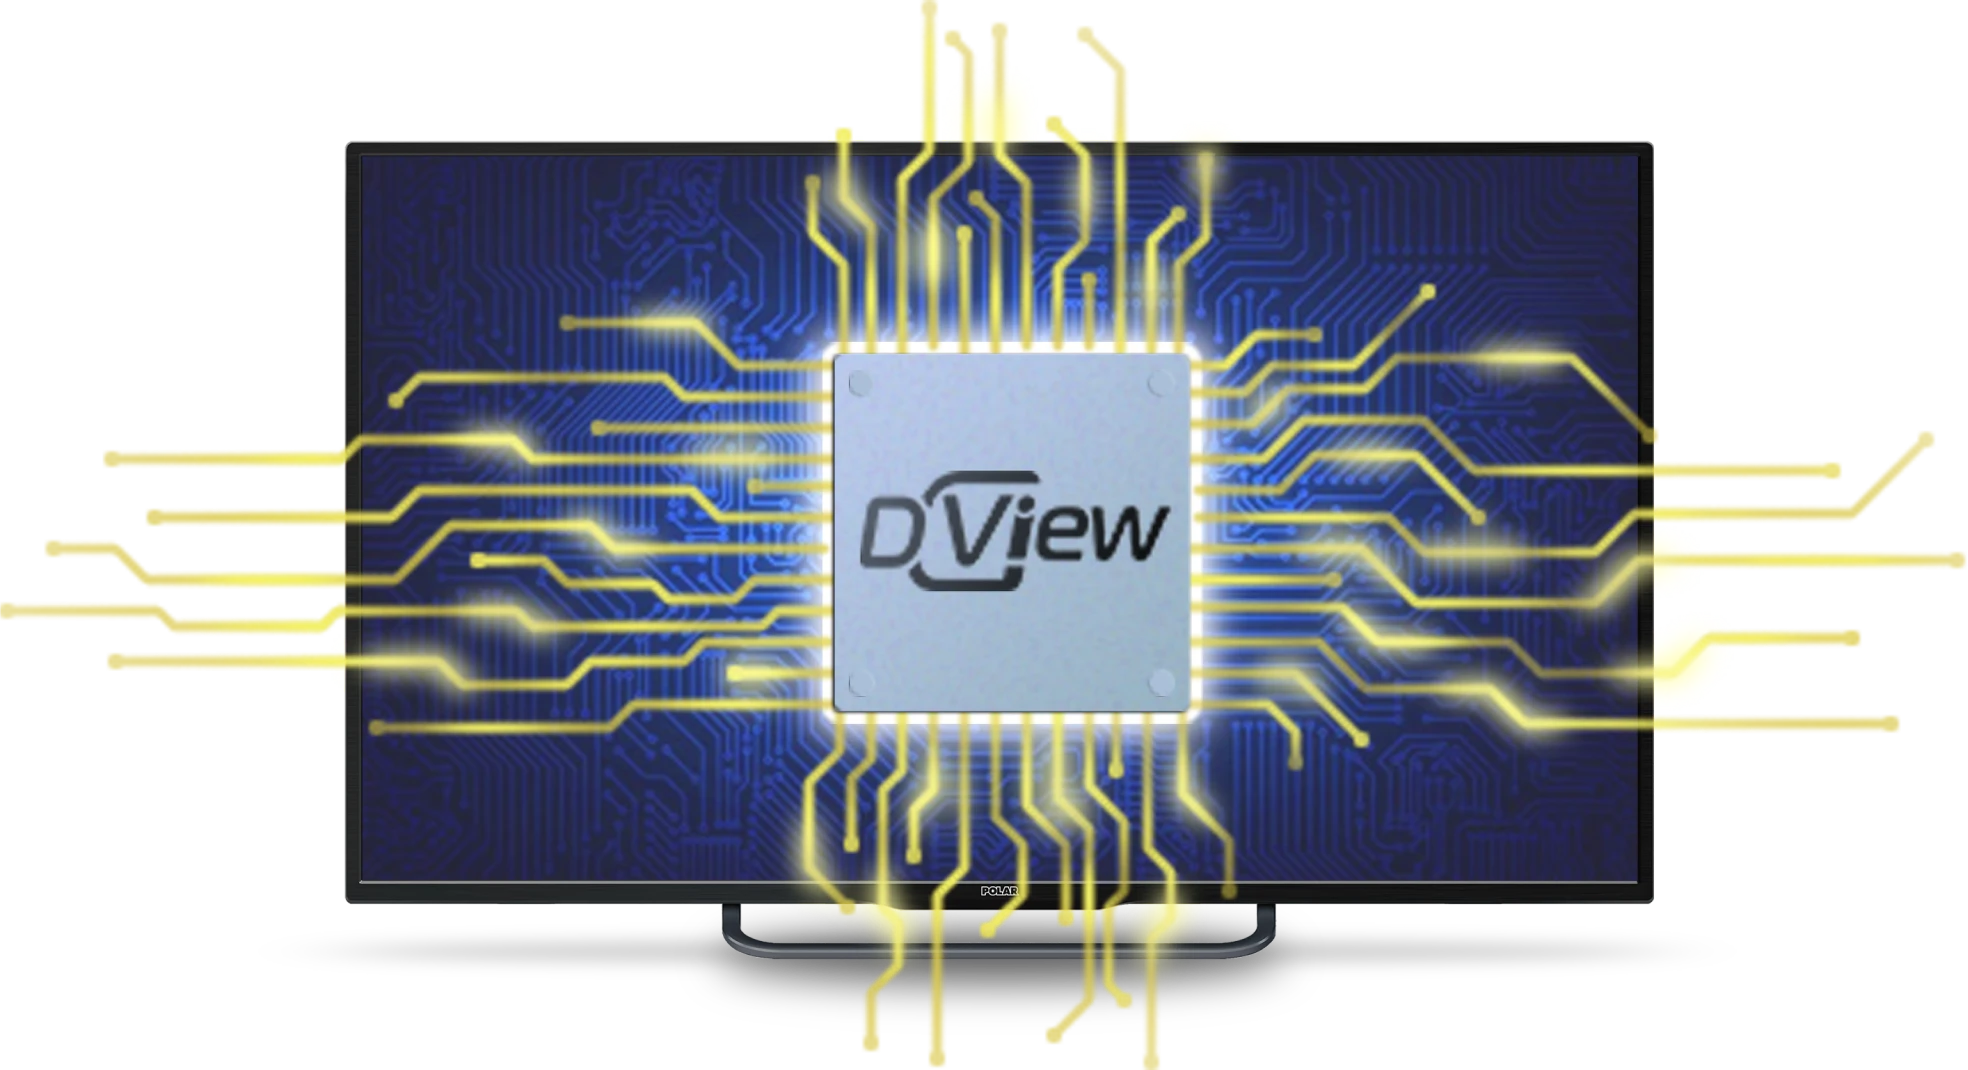 DGViewtechnology